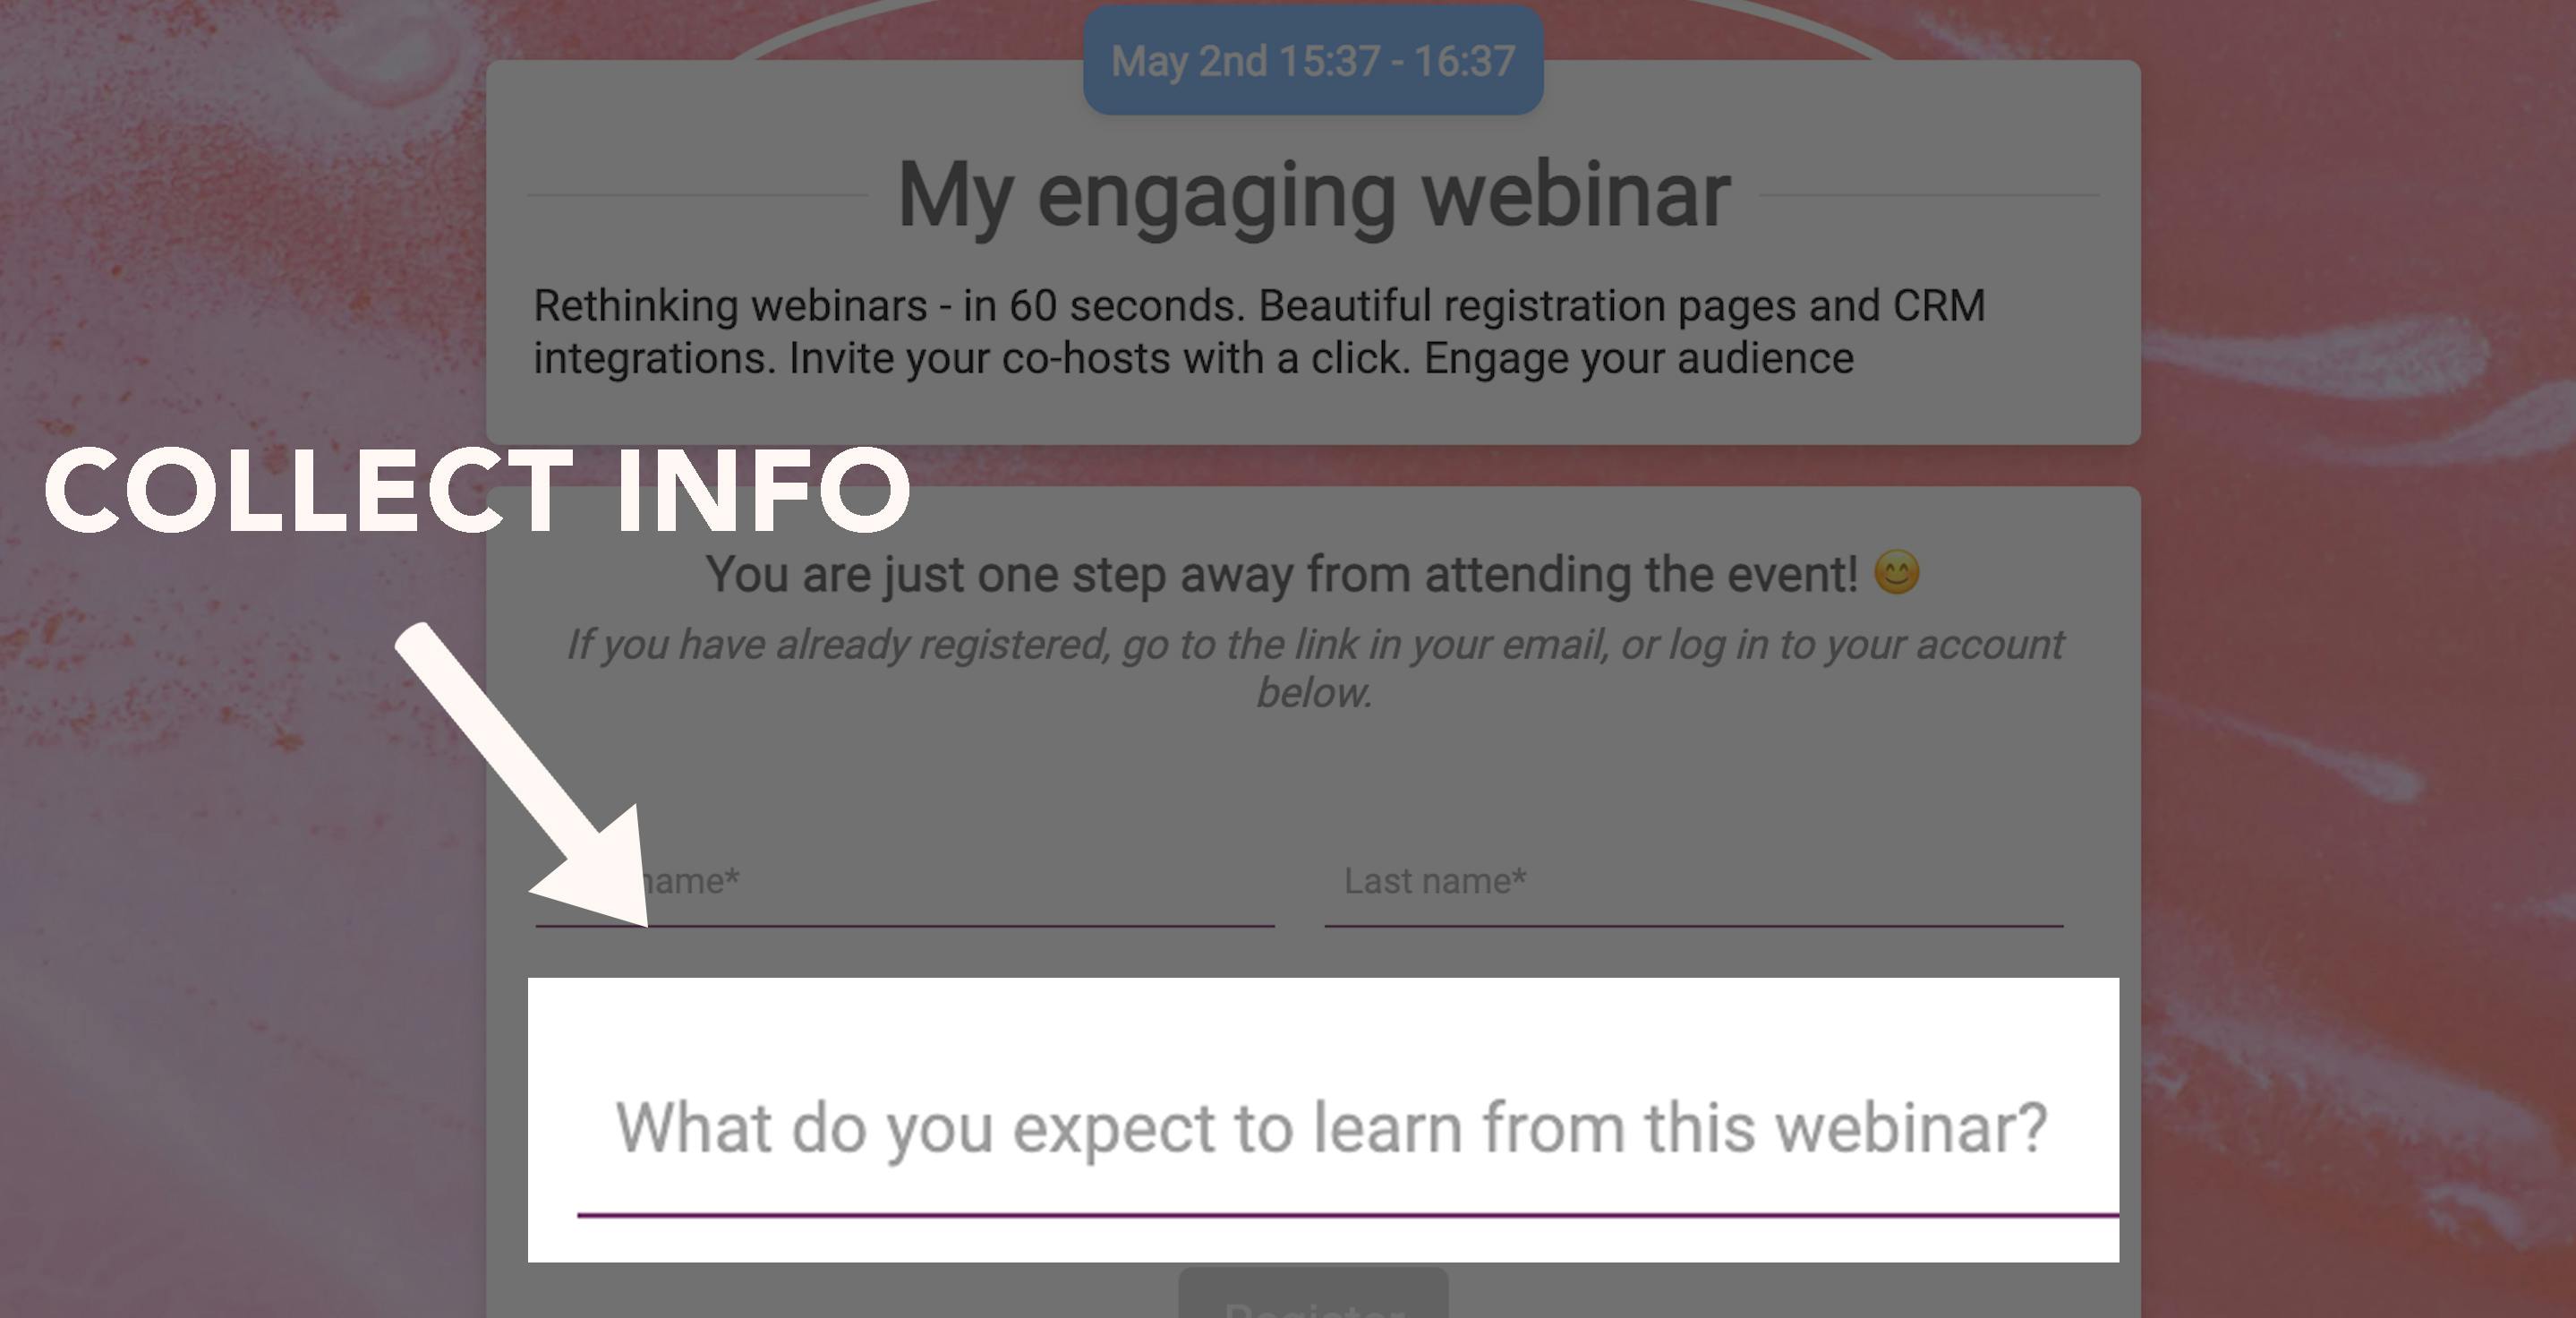 Collecting attendee information on webinar landing page